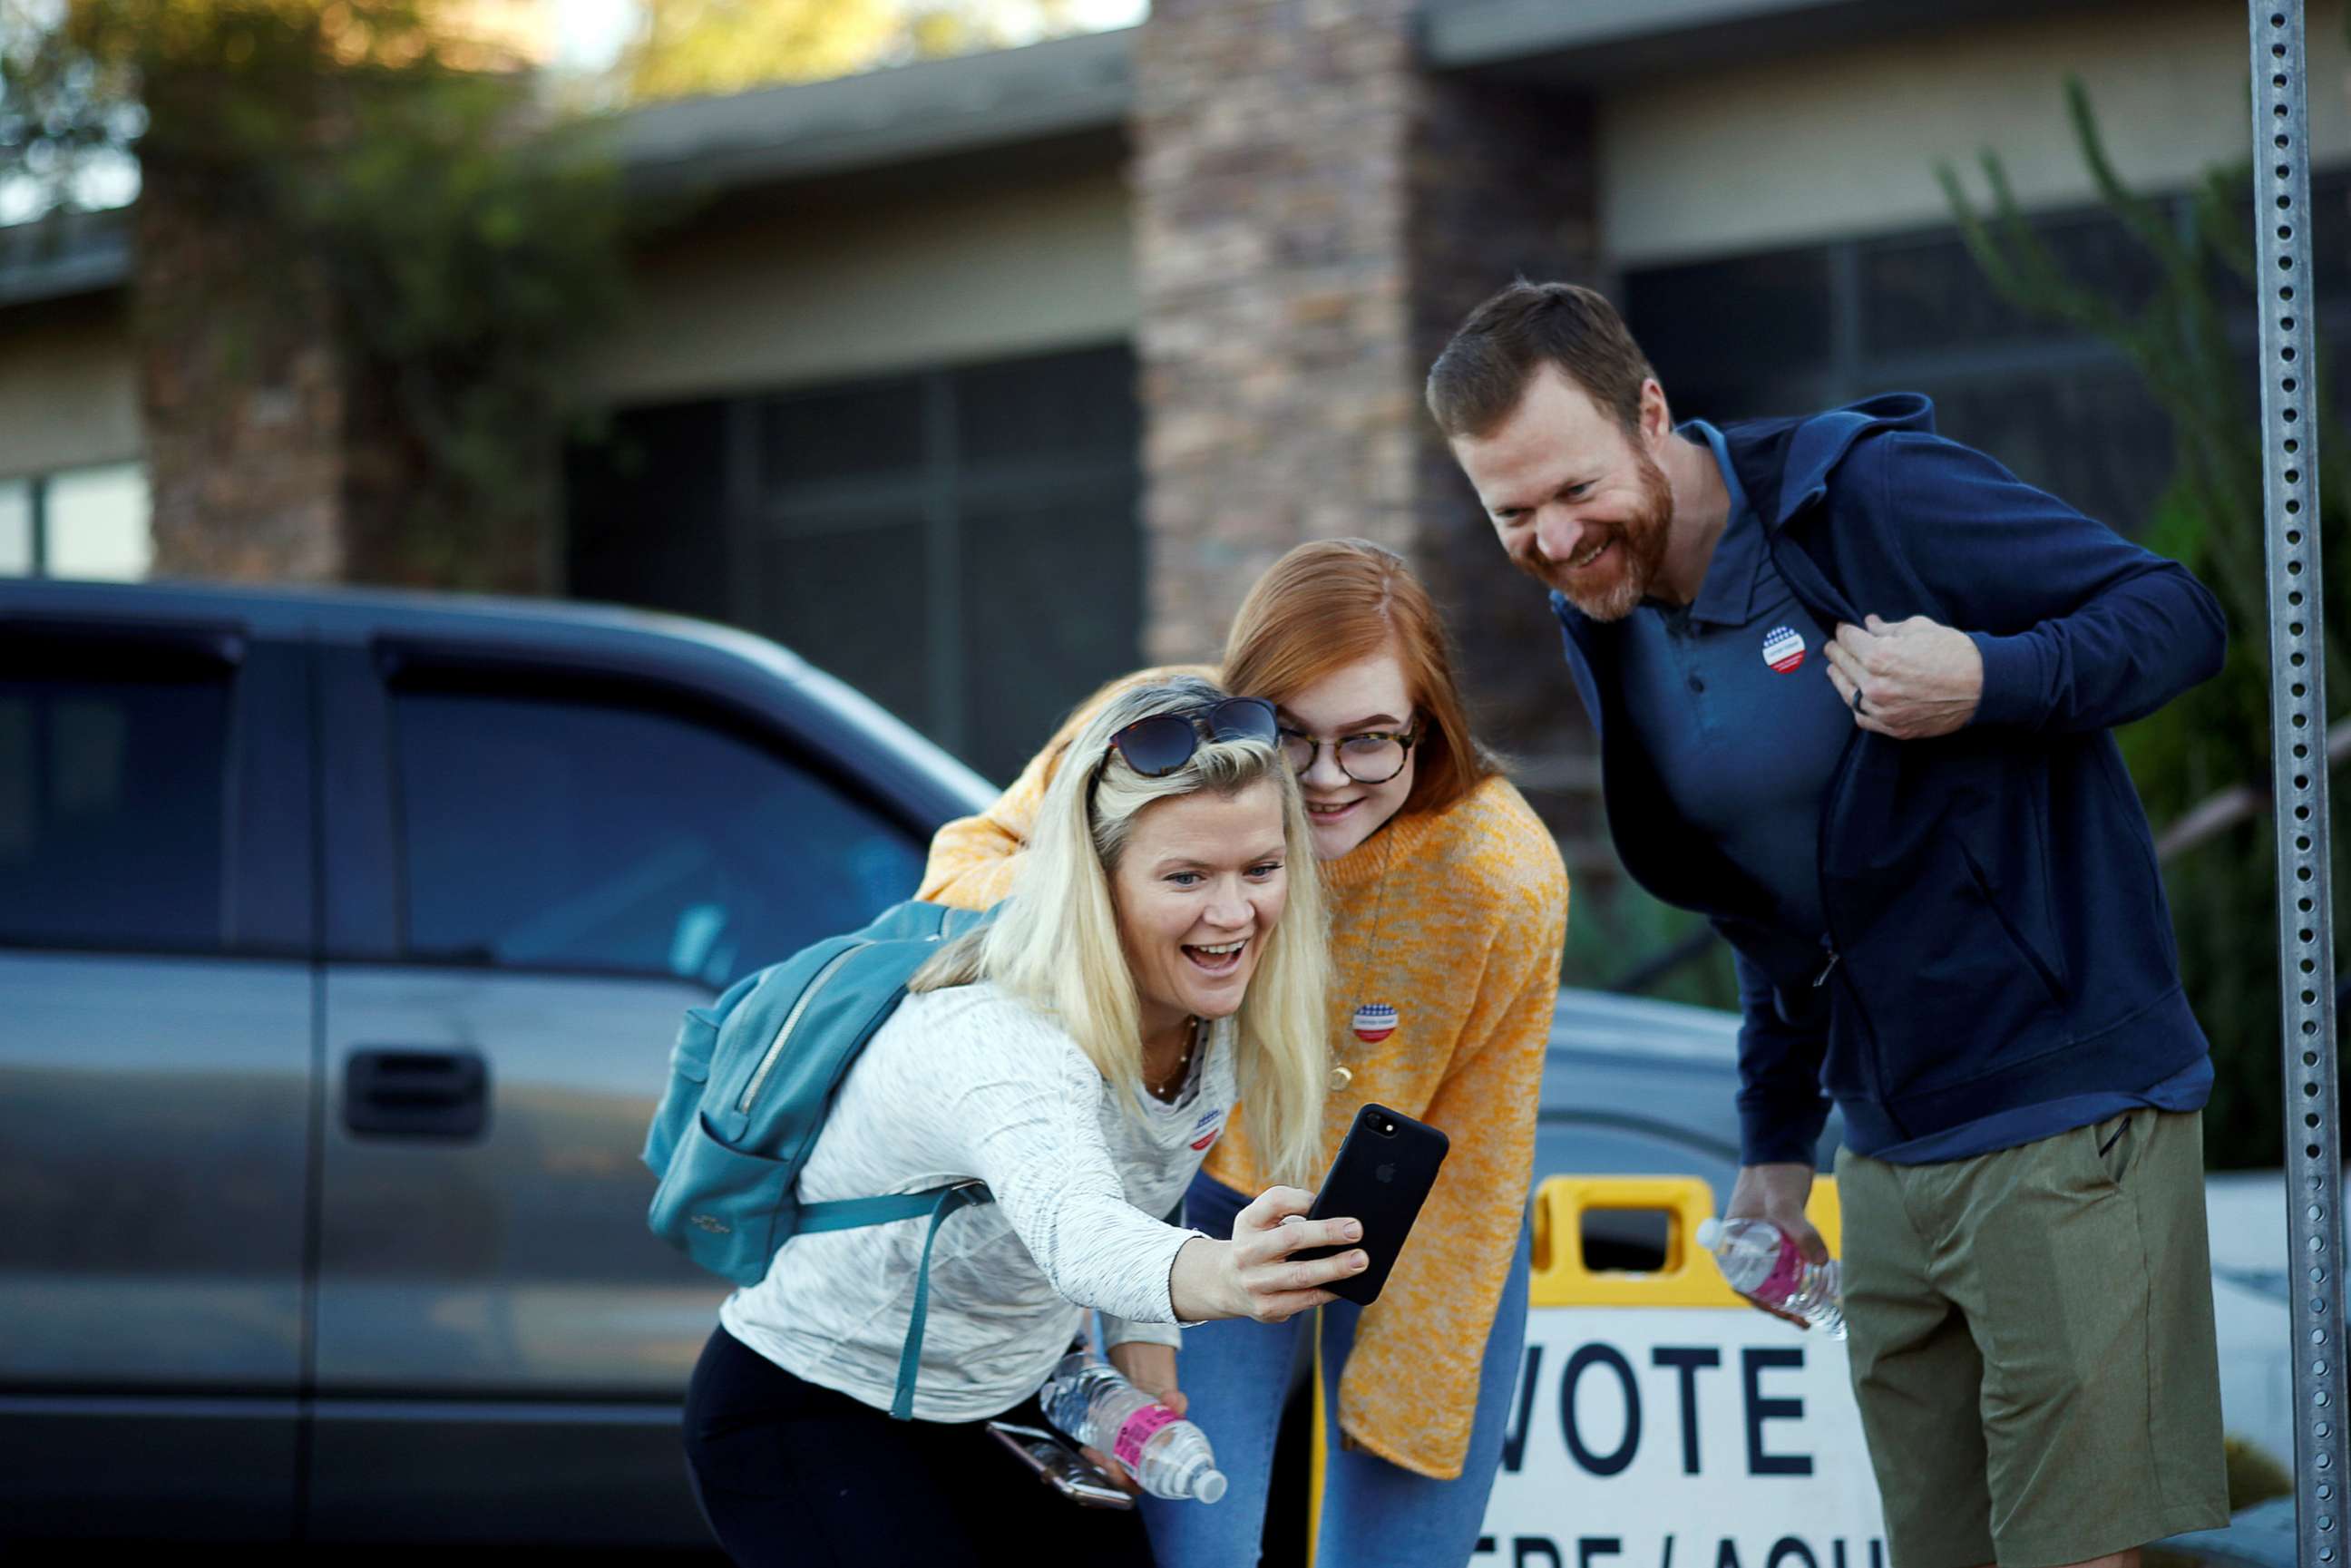 PHOTO: Victoria Leach, 18, takes a selfie with her parents Tricia Leach and Marc Leach after voting at a polling station in Carefree, Ariz., Nov. 6, 2018.